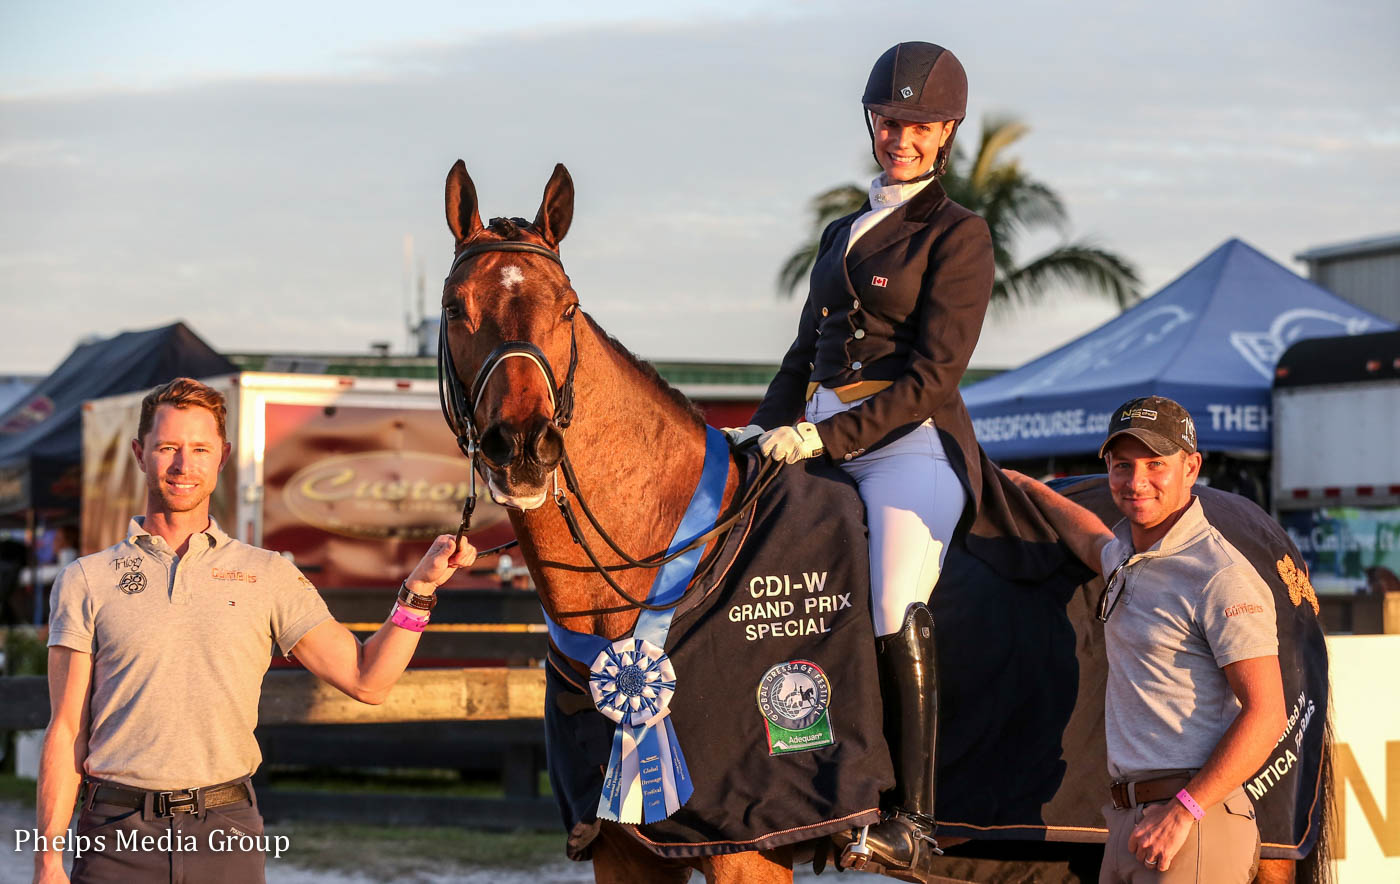 Nicholas Fyffe and David Marcus with their student, Leah Wilson Wilkins on Fabian JS, after winning the Grand Prix Special at the Lloyd Landkamer CDI-W.